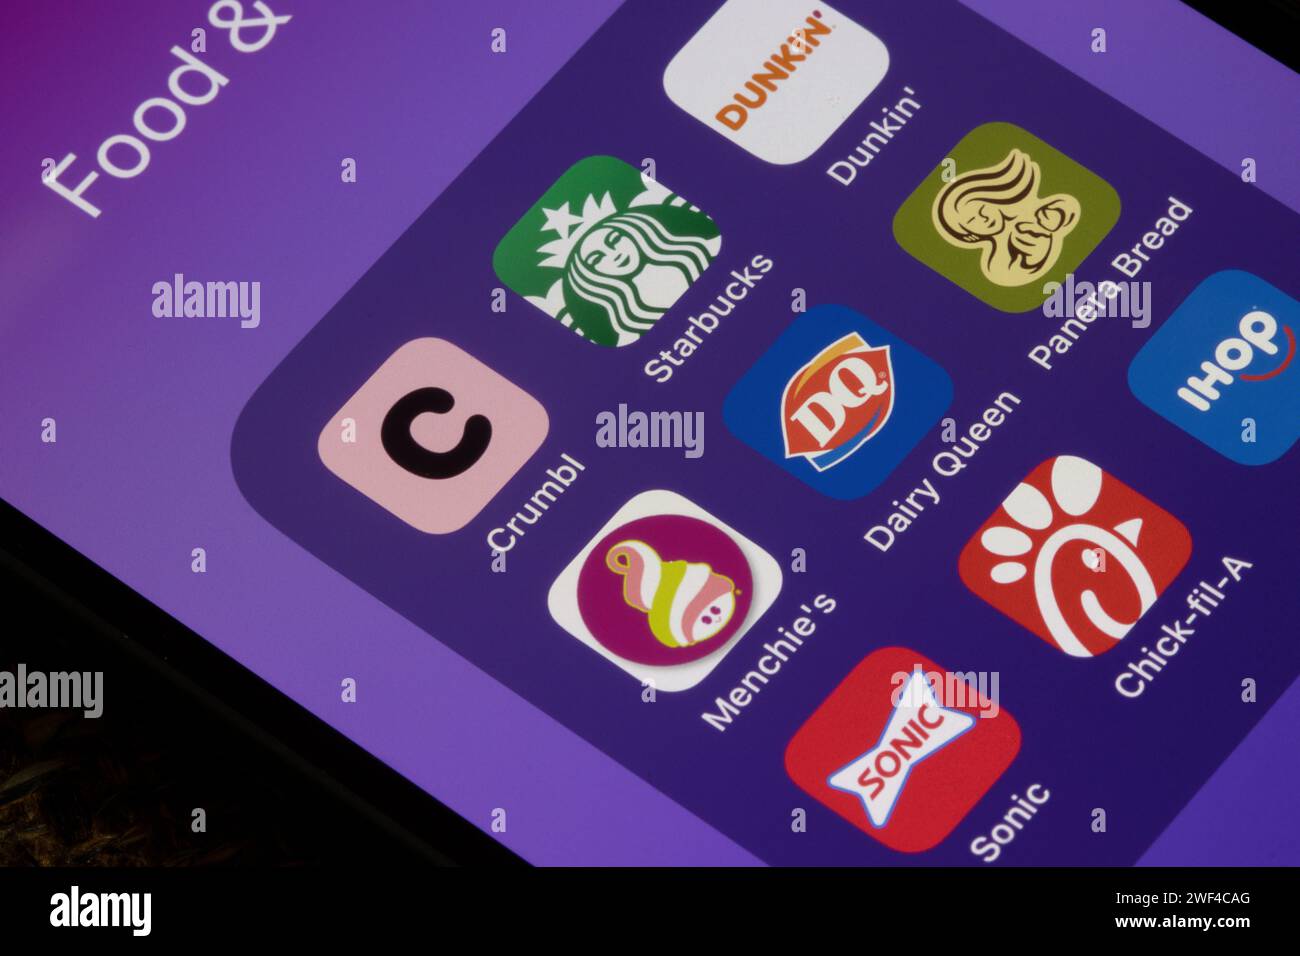 Assorted food and drink apps are seen on an iPhone, including Crumbl, Starbucks, Dunkin', Menchie's, Dairy Queen, Panera Bread, Sonic, Chick-fil-A ... Stock Photo